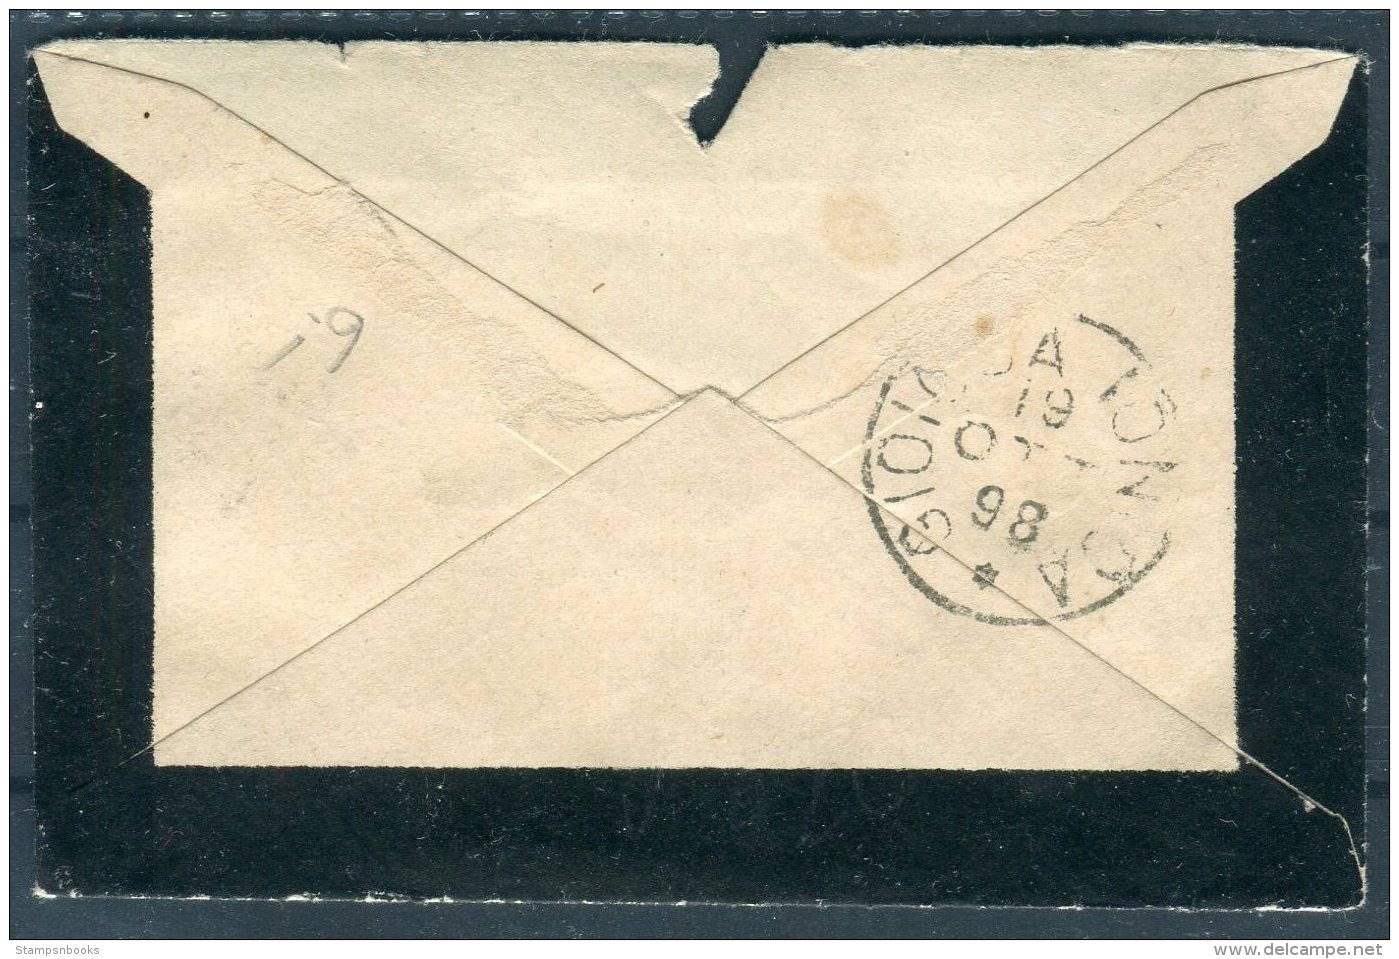 1898 Italy Amantea Mourning Cover - Gioiosa Ionica - Poststempel